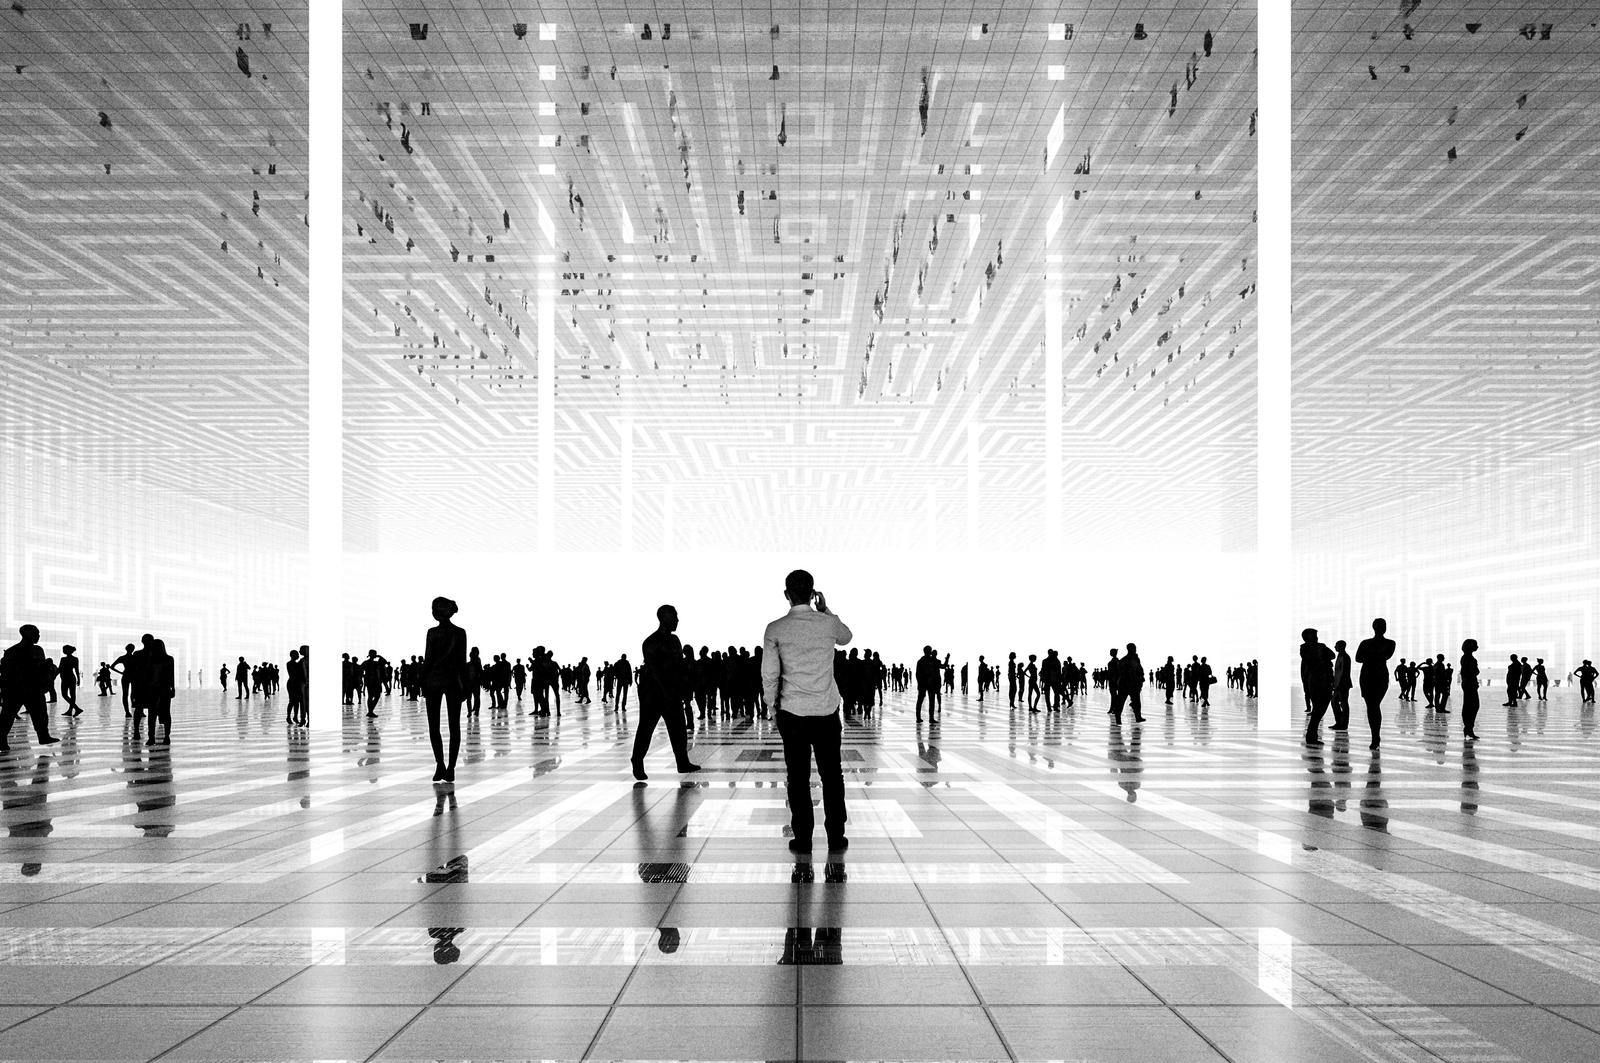 People walking in a modern building with decorative ceiling